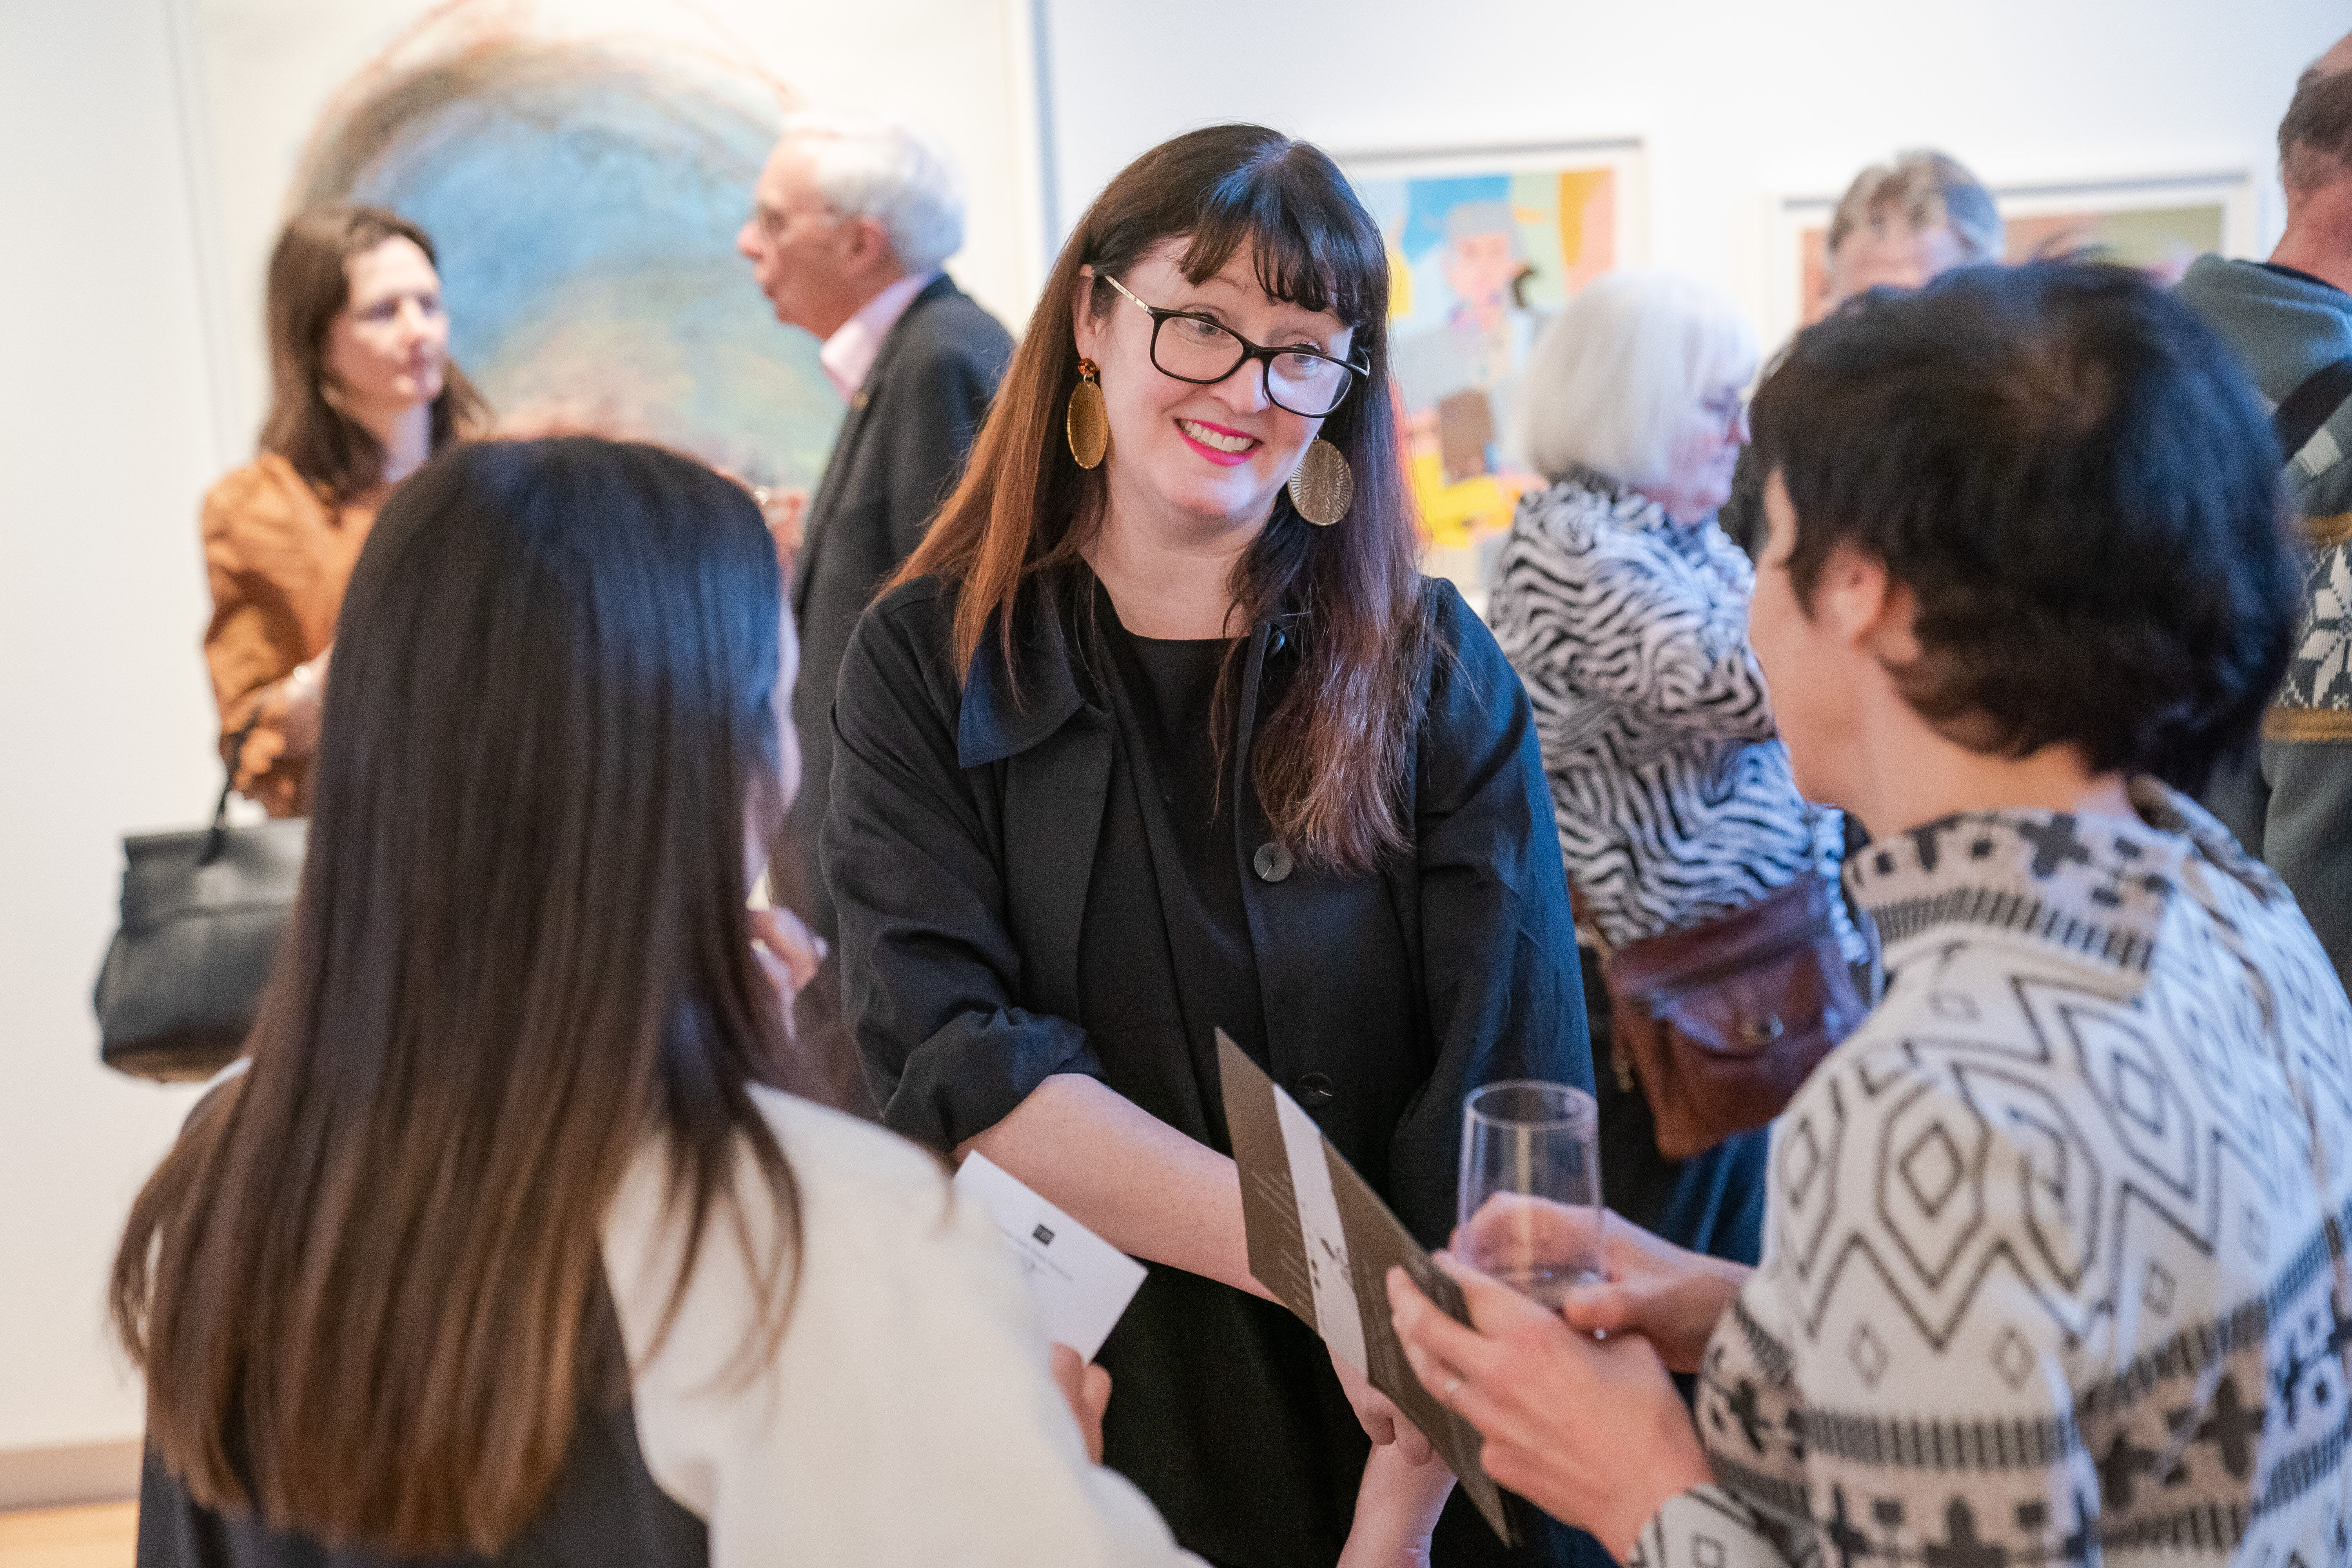 Three women standing and talking to one another, two are pictured from behind and a dark haired woman wearing glasses and a black dress is pictured in the centre. There are people standing in the background and appear out of focus. A number of artworks are on the wall in the background. Photo by James Gifford-Mead